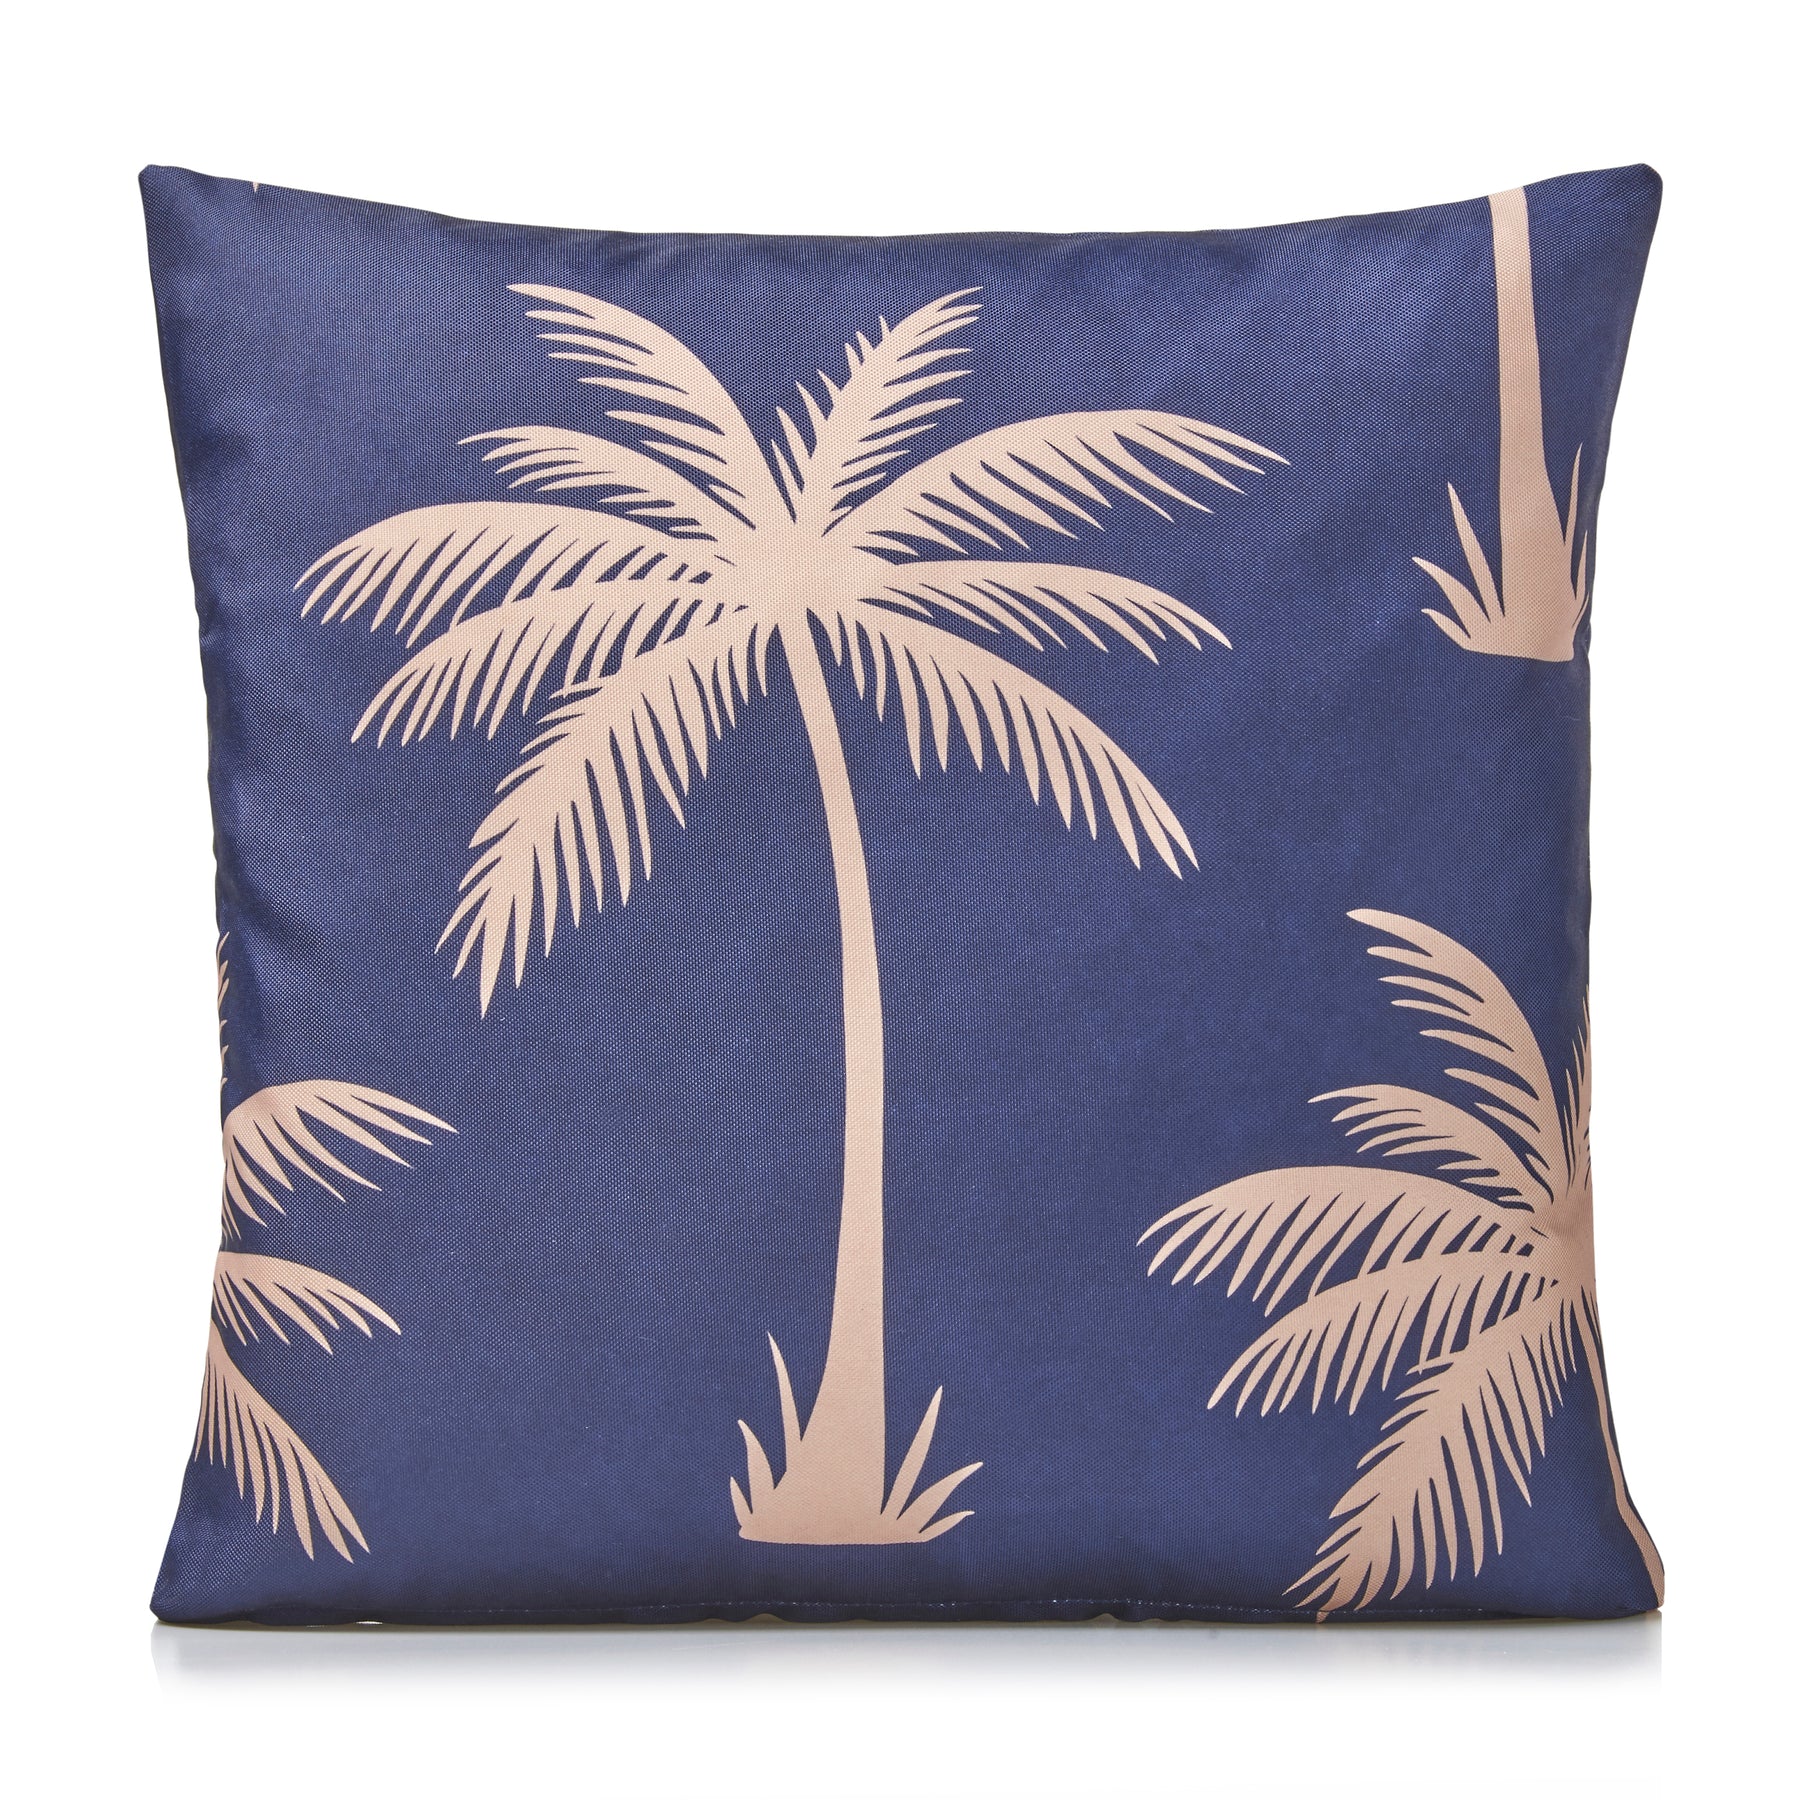 Palm Water Resistant Outdoor Filled Cushion 46cm x 46cm Blue